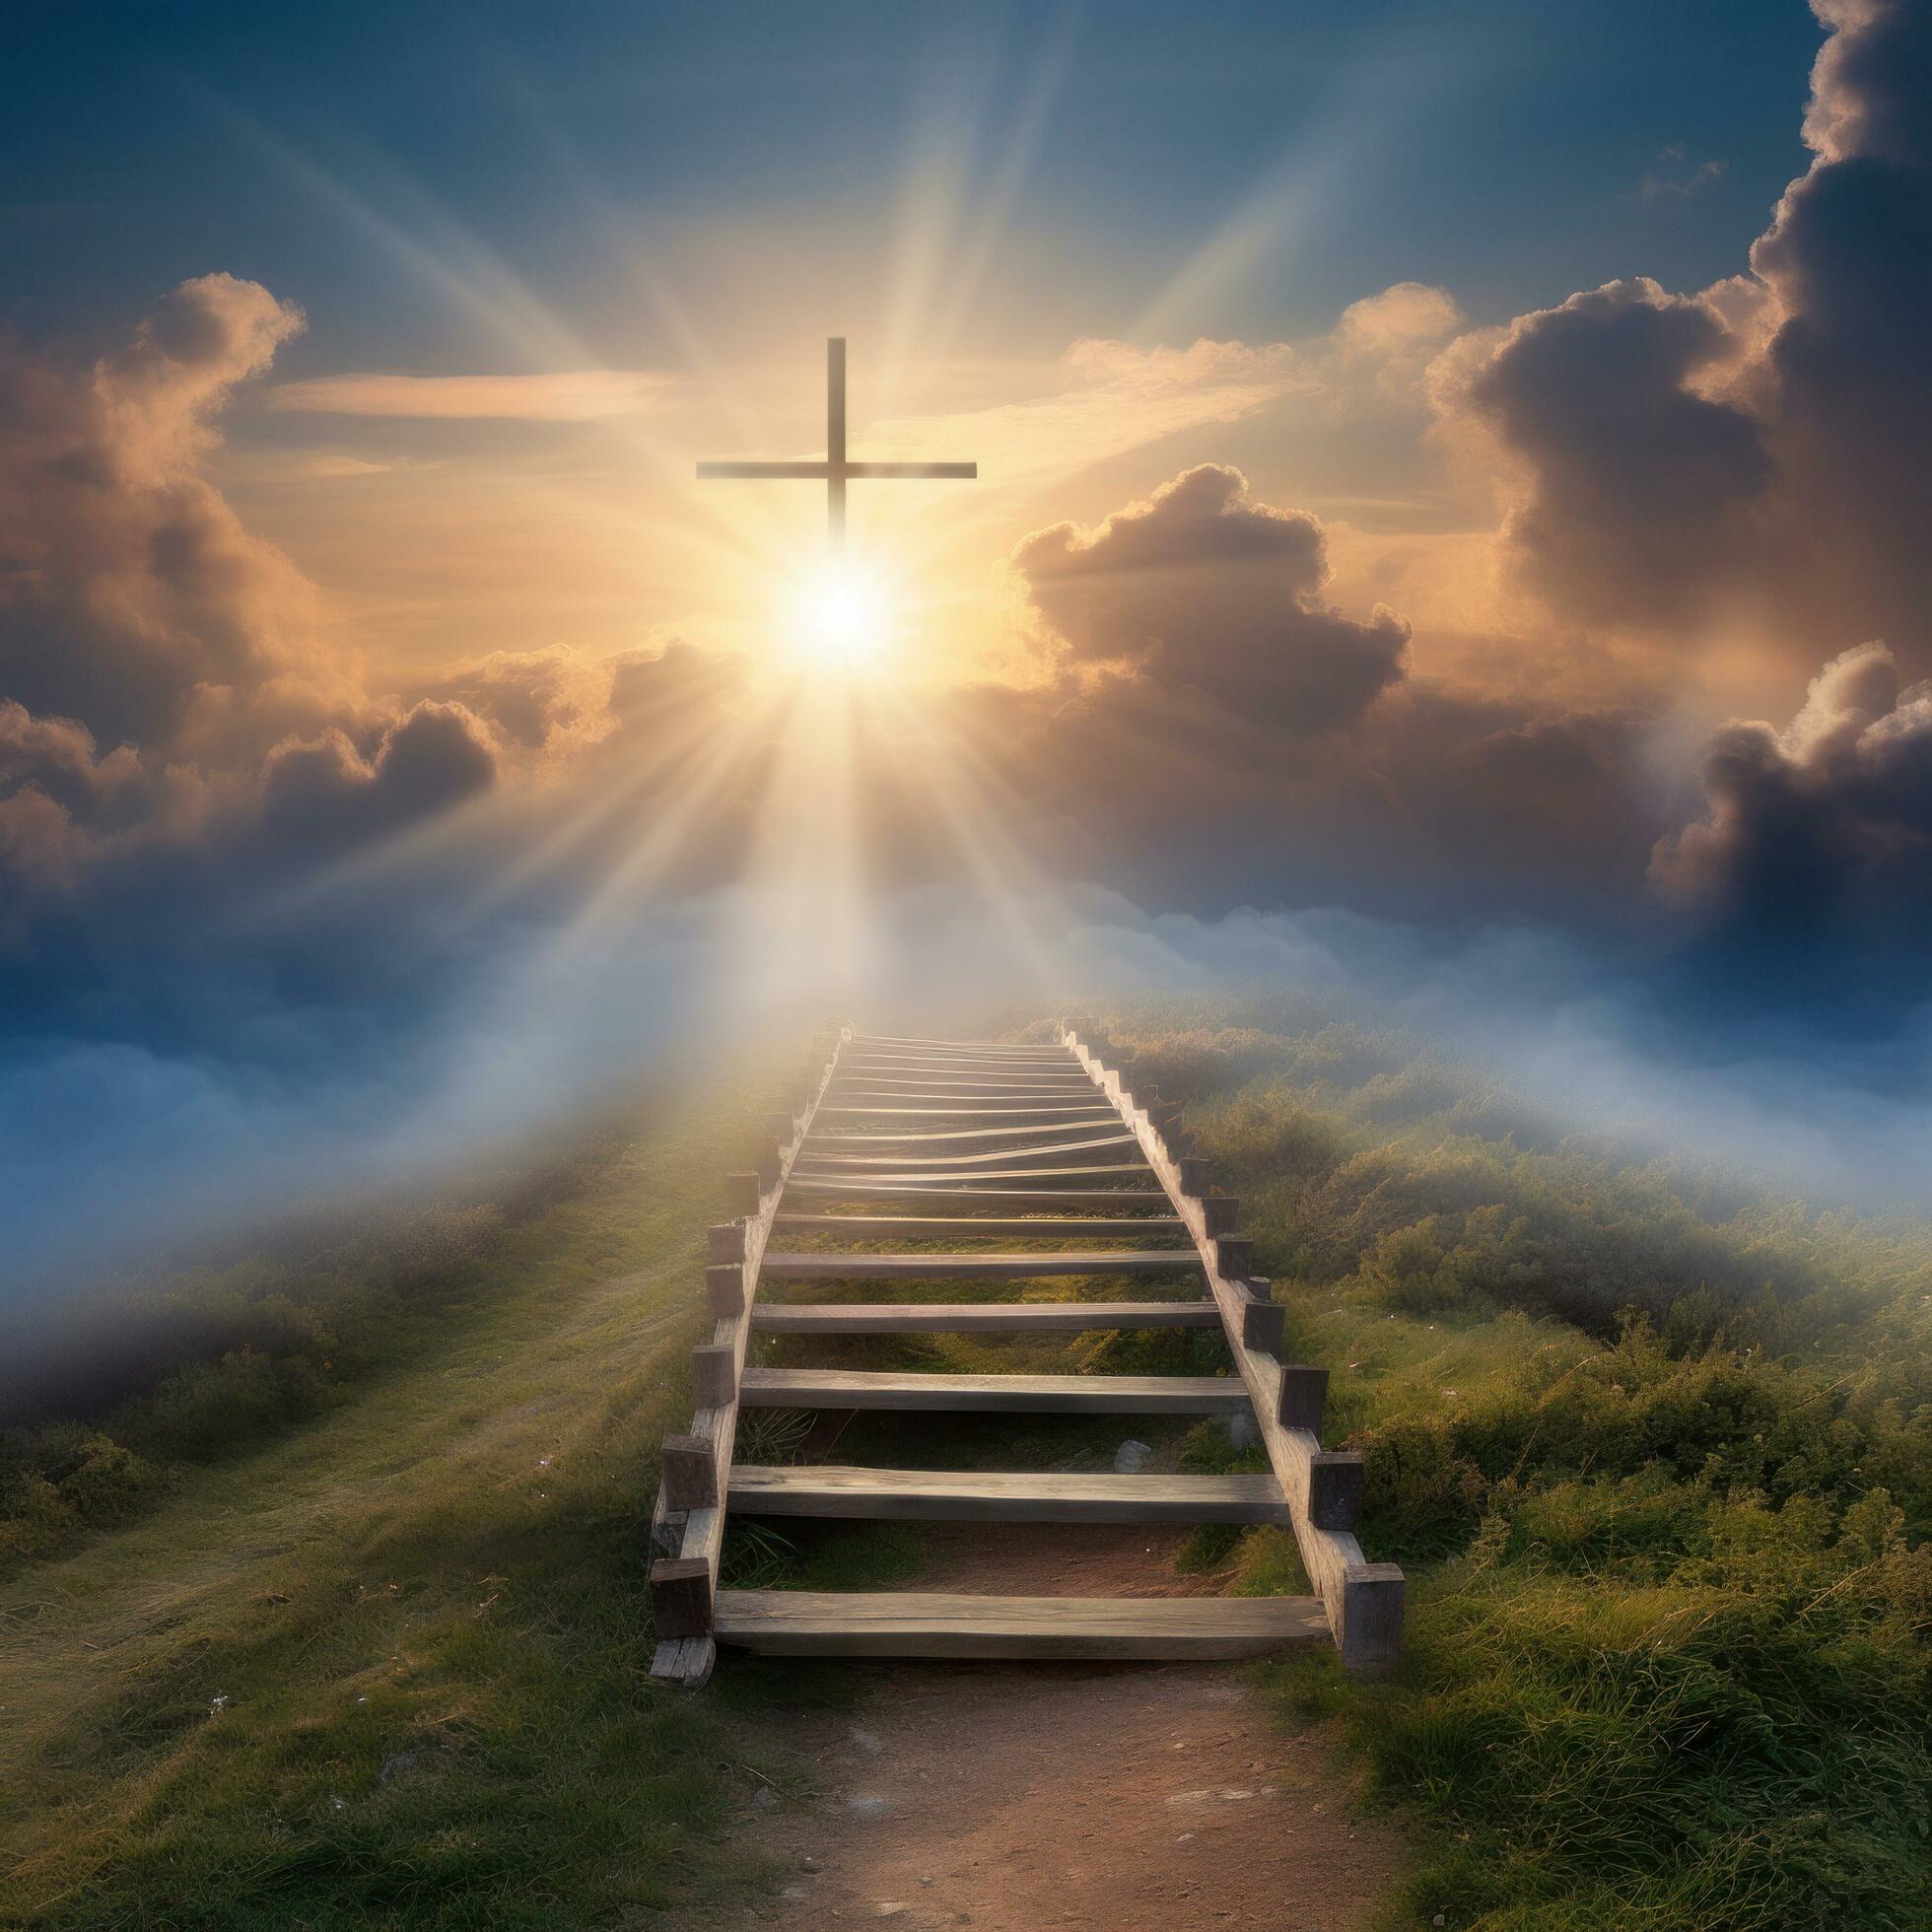 Illustration Of Stairs On The Way To Heaven Background, Way